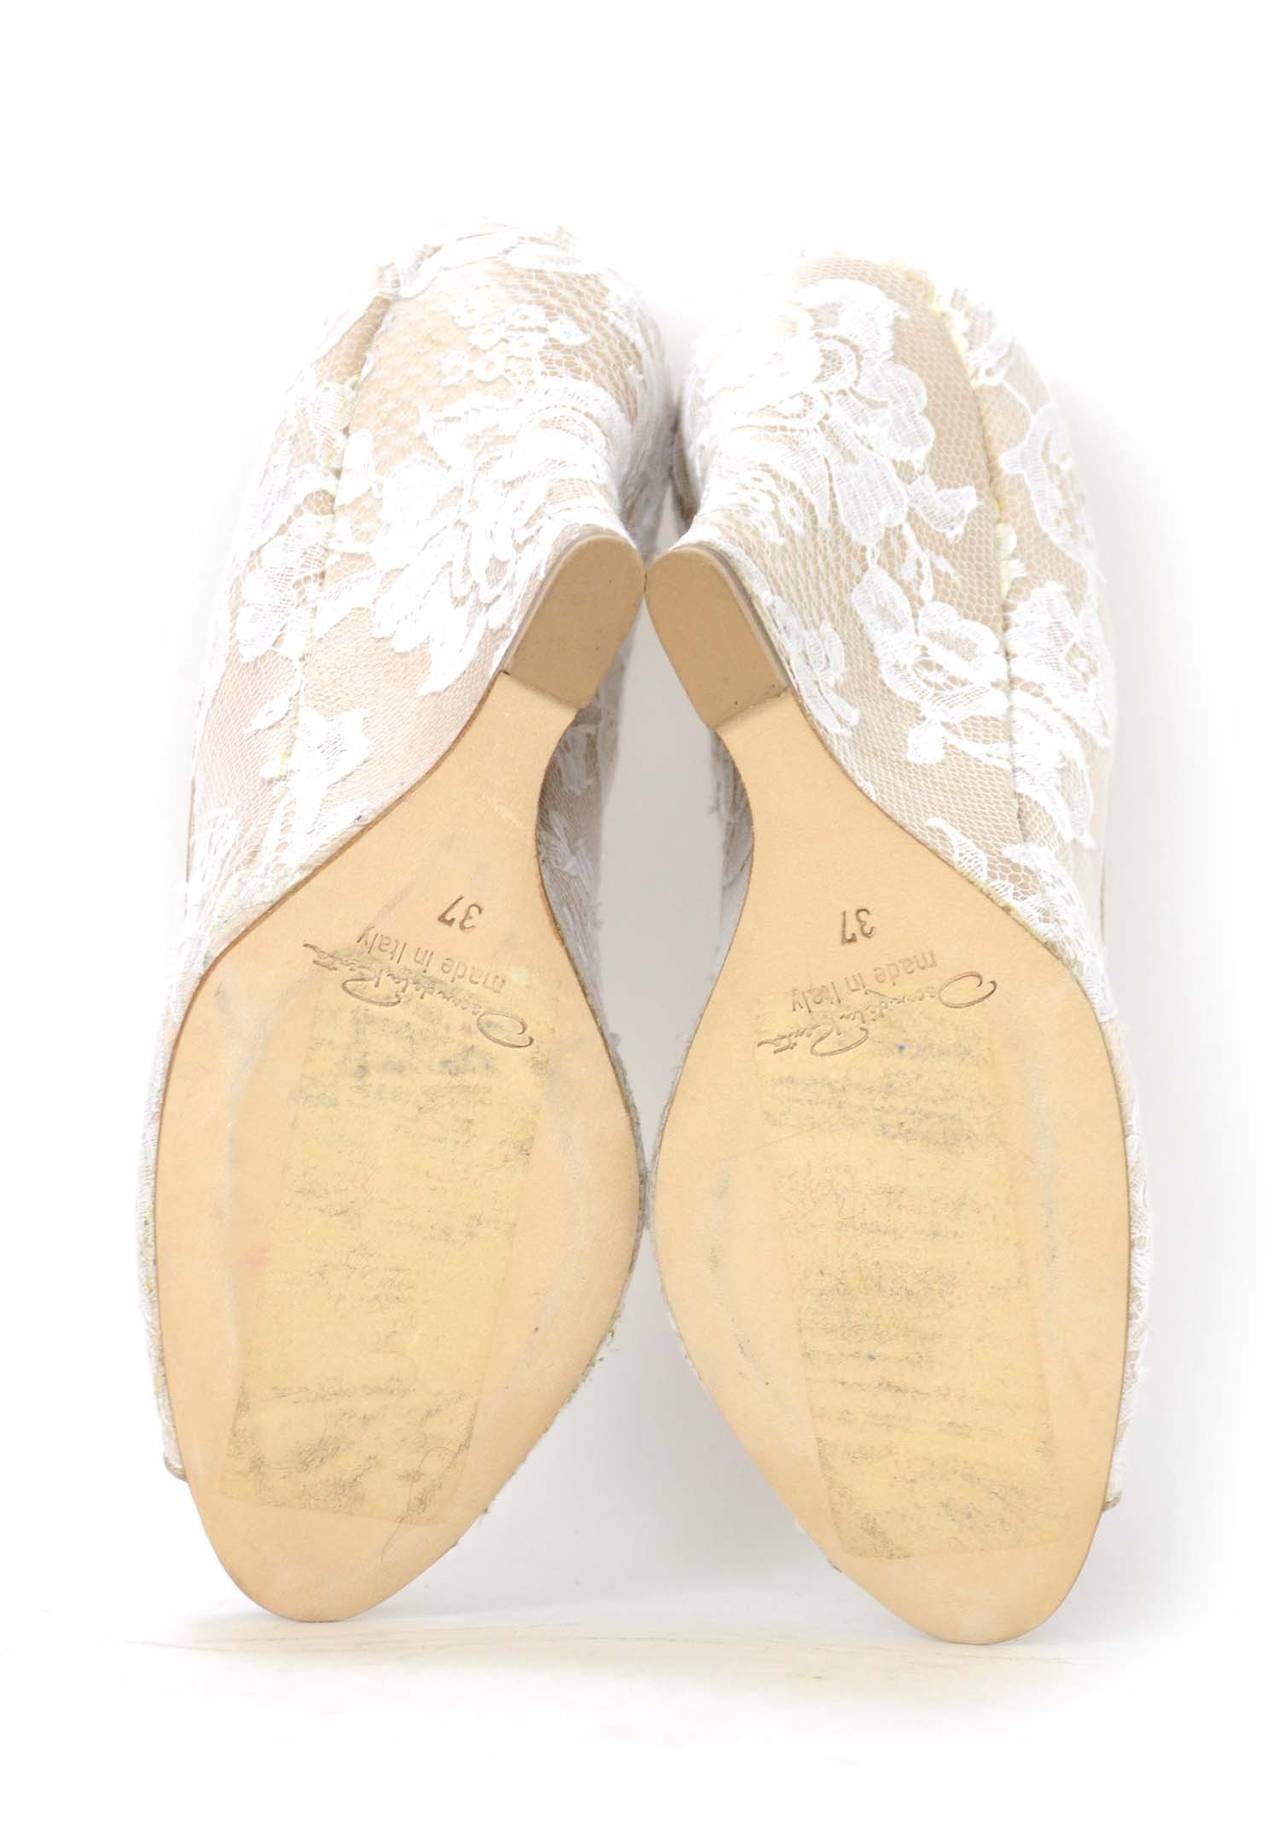 OSCAR DE LA RENTA Nude Peep-toe Wedges W/ White Lace Overlay sz. 37 In Excellent Condition In New York, NY